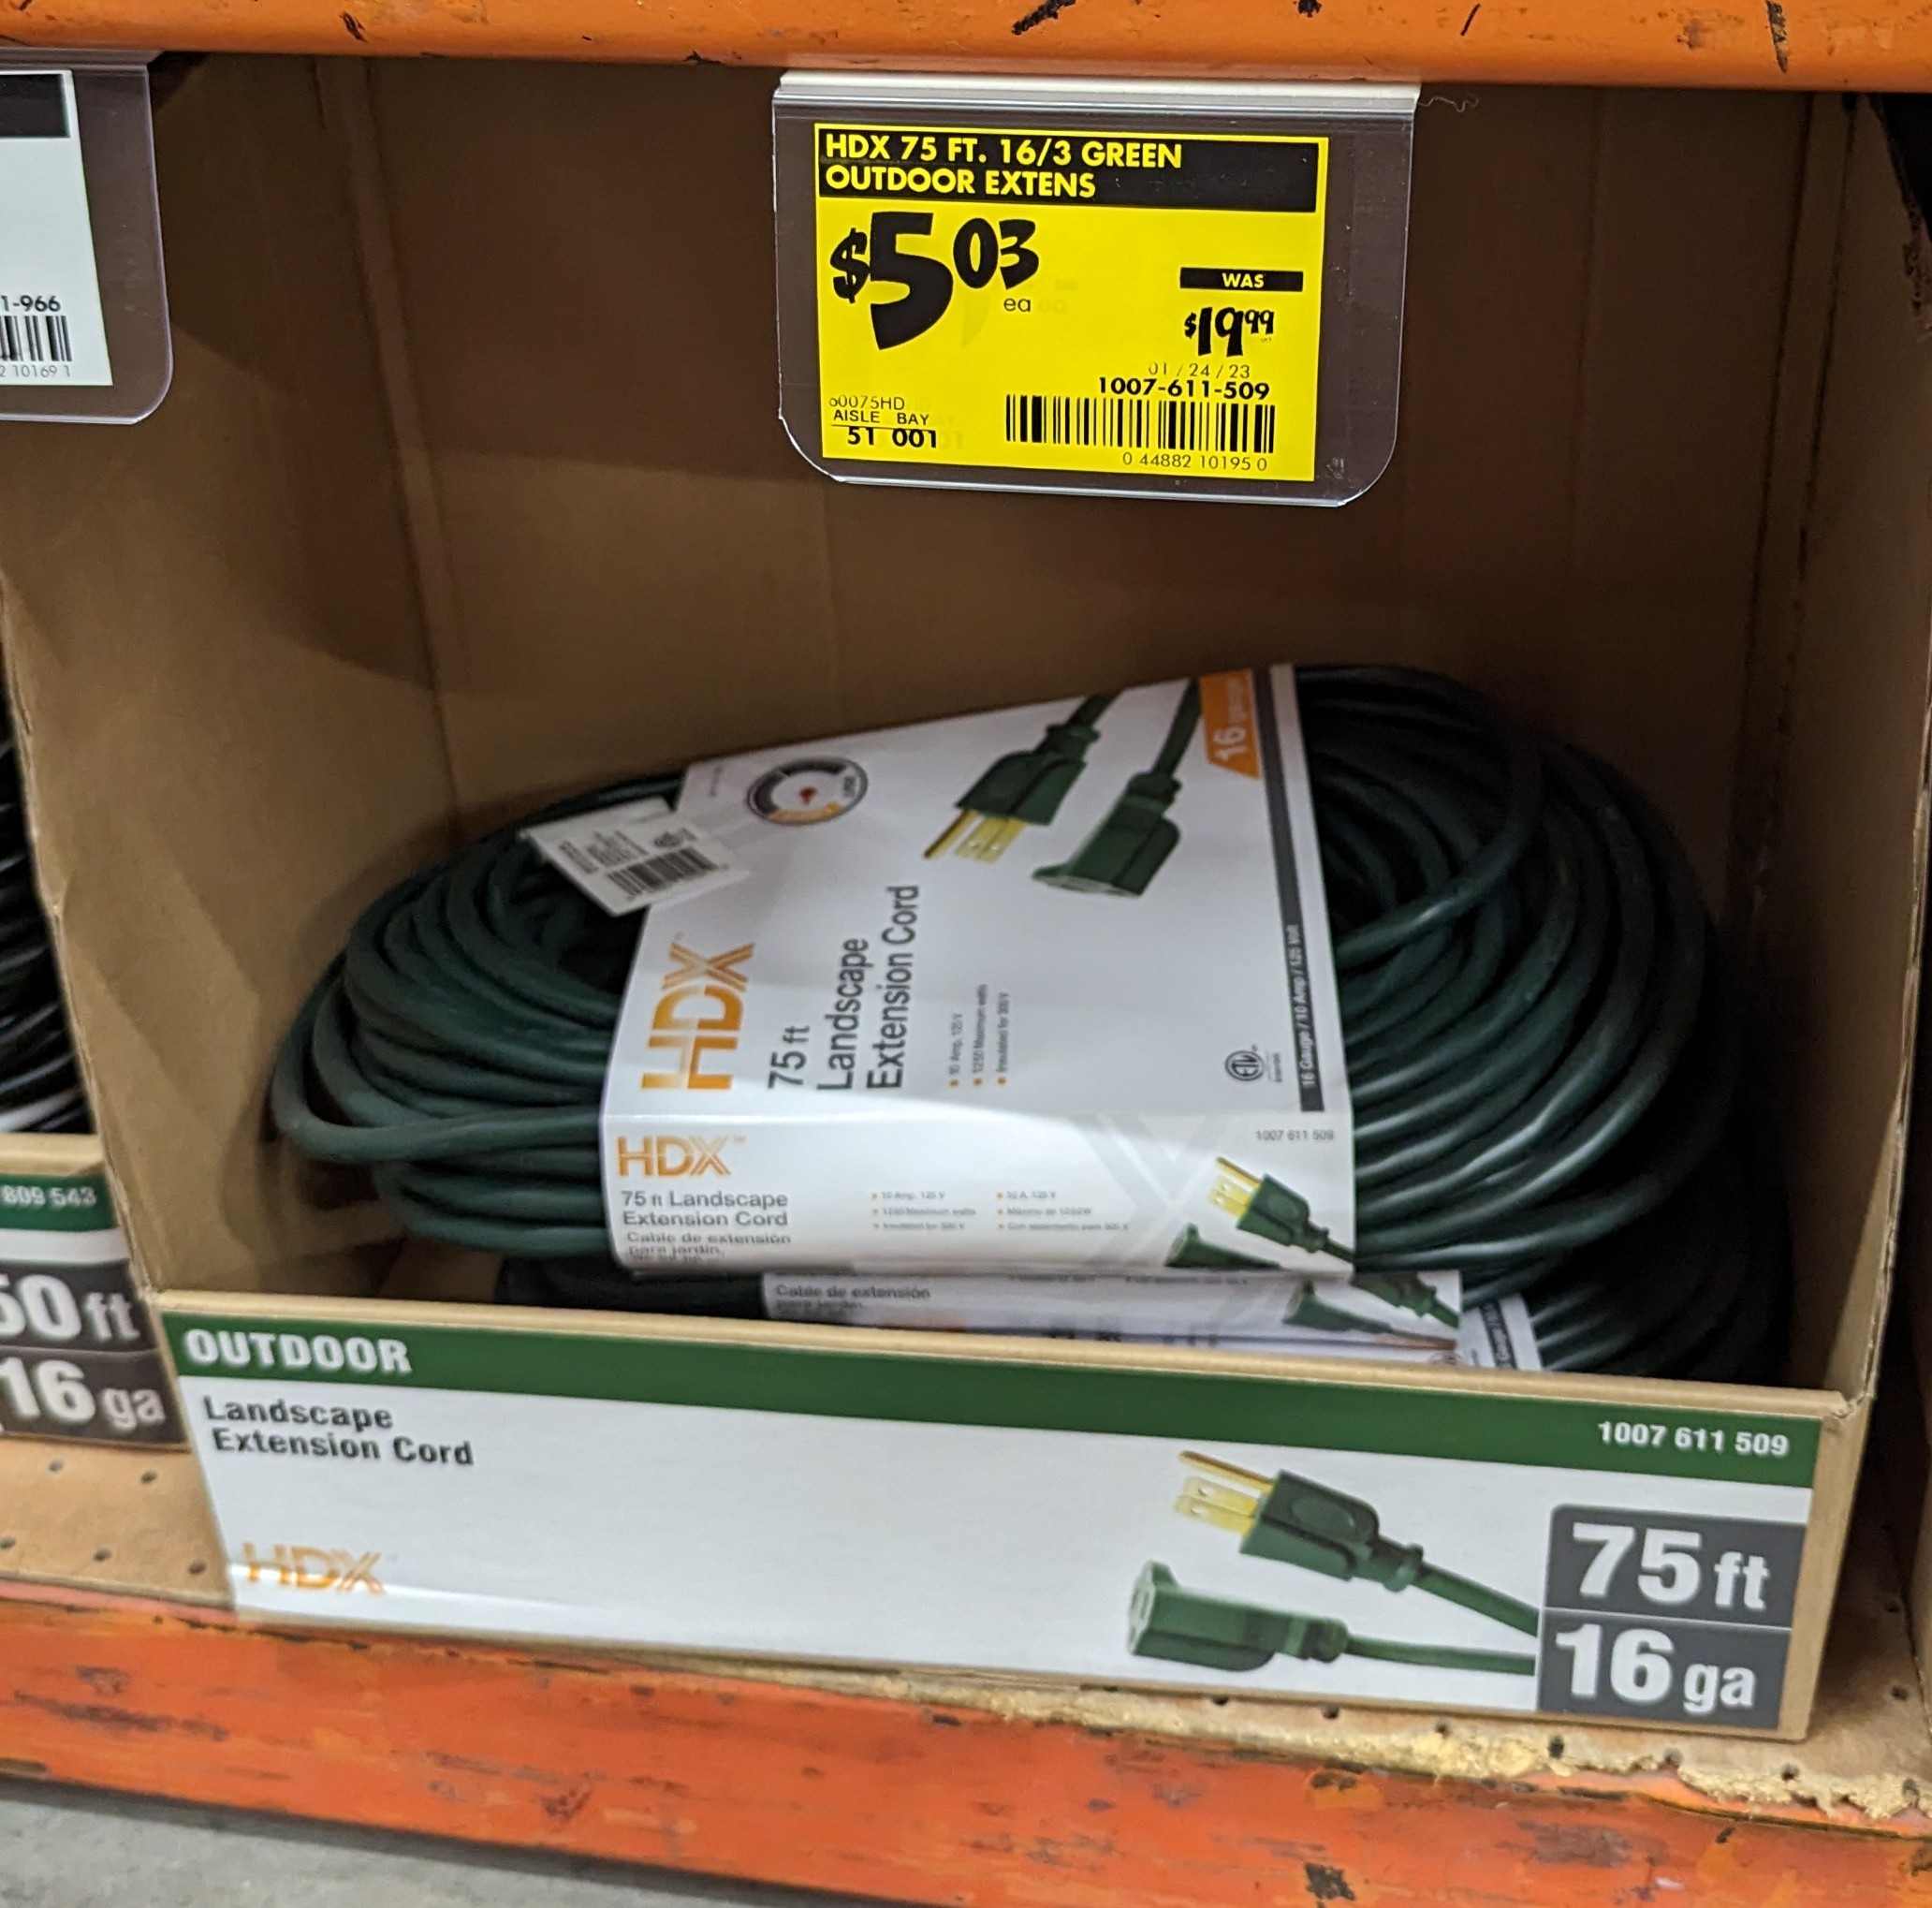 YMMV In-Store Only HDX 75 ft. 16/3 Green Outdoor Extension Cord (1-Pack) $5.03